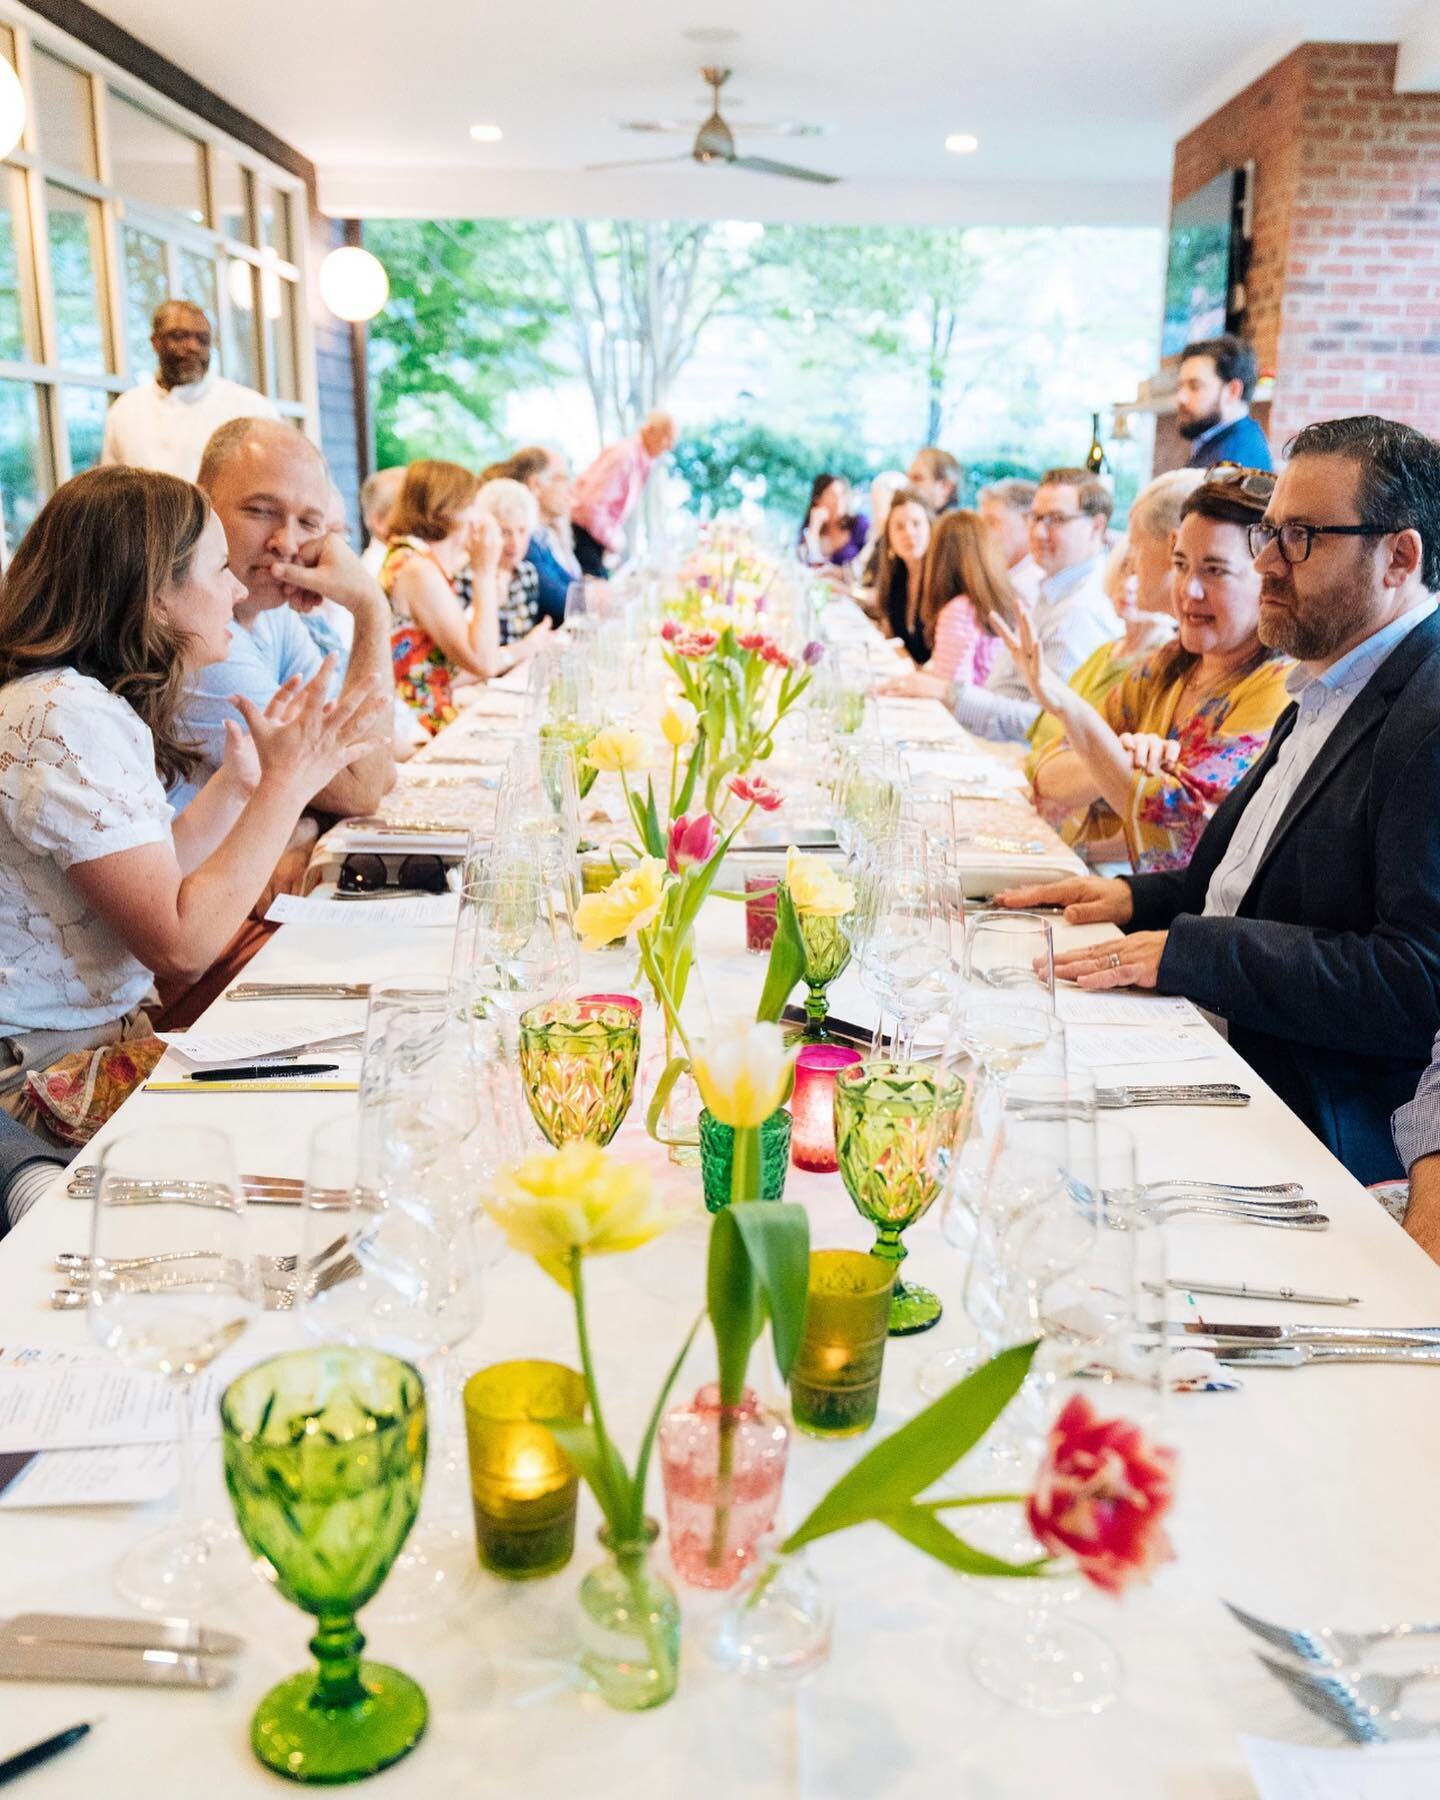 #CLTWineandFood Week presented by @truist held a vintner dinner generously hosted at the private residence of Bruce and Leslie Schlernitzauer, proprietors of @porcupineprovisions, who also curated and cooked the evening&rsquo;s menu. The dinner featu